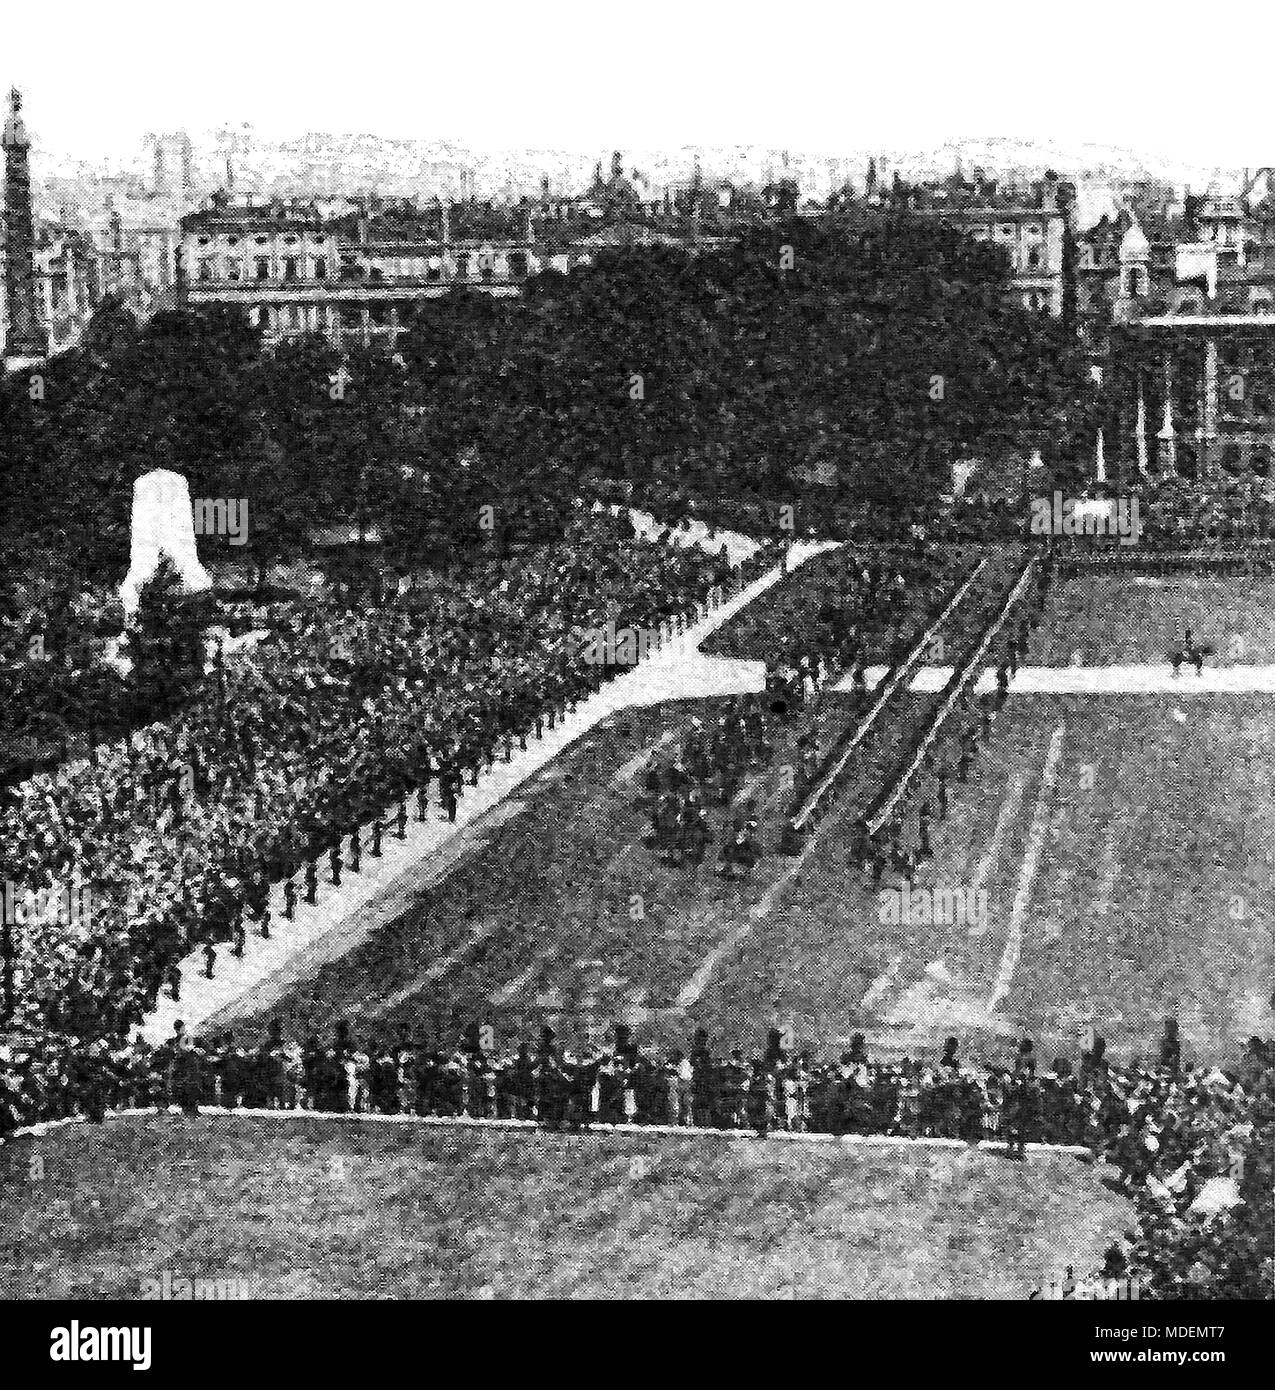 Trooping the Colour, Horse Guards Parade, London  UK 1932 Stock Photo